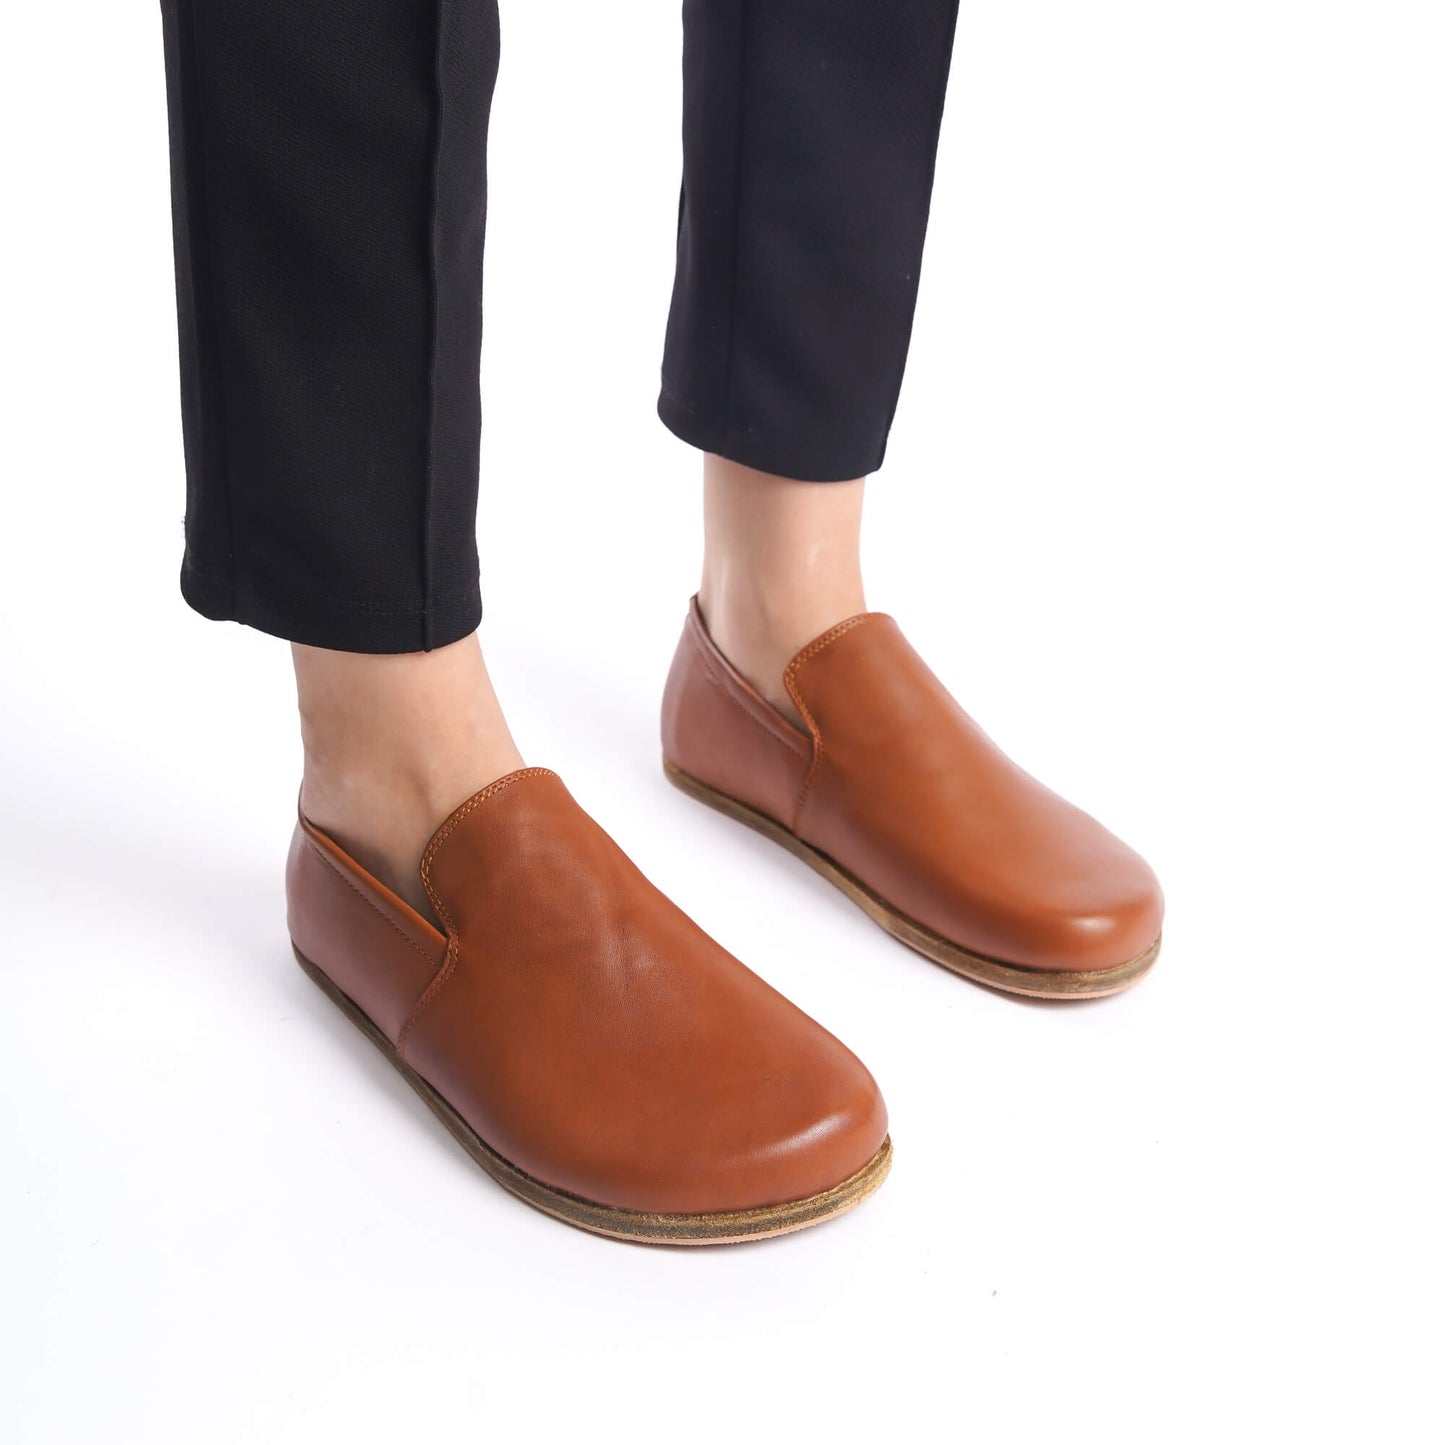 Close-up of Aeolia tan brown leather barefoot women loafers, paired with black pants.